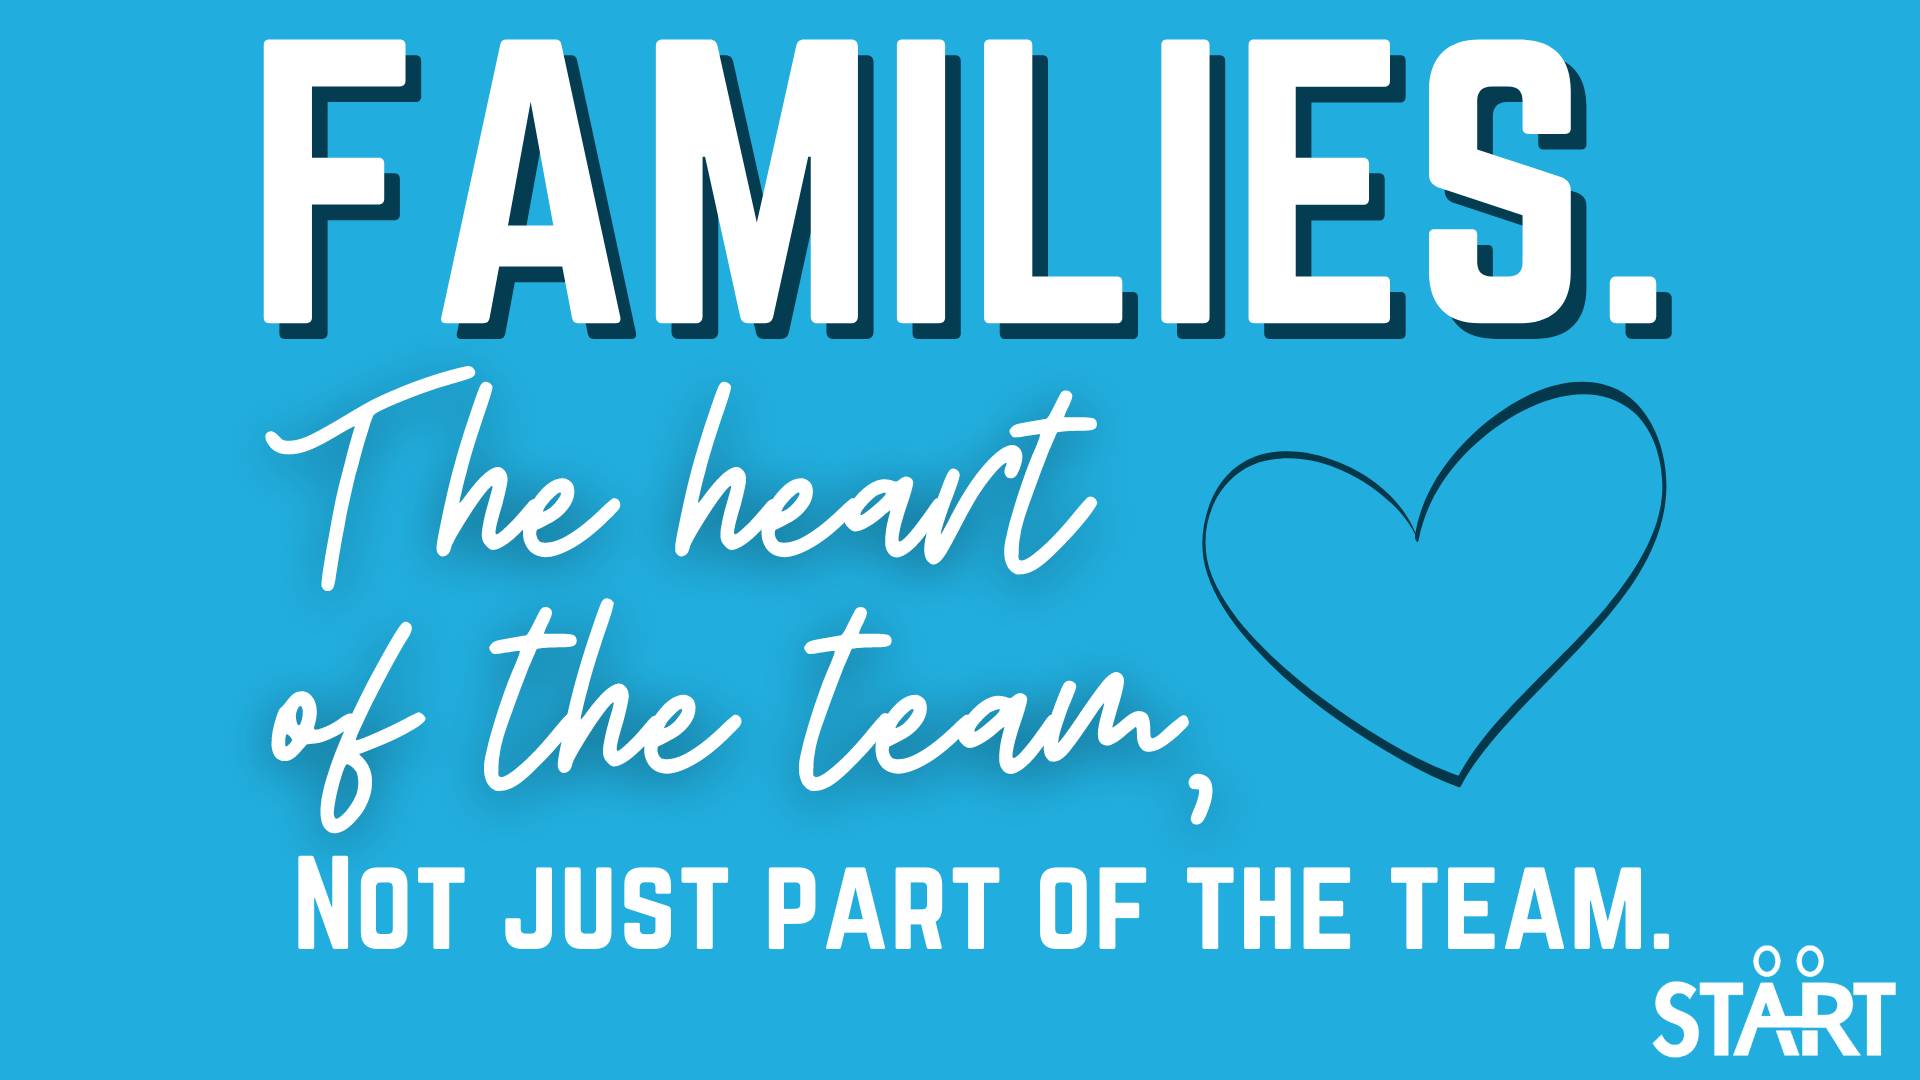 Families. The heart of the team, not just part of the team.